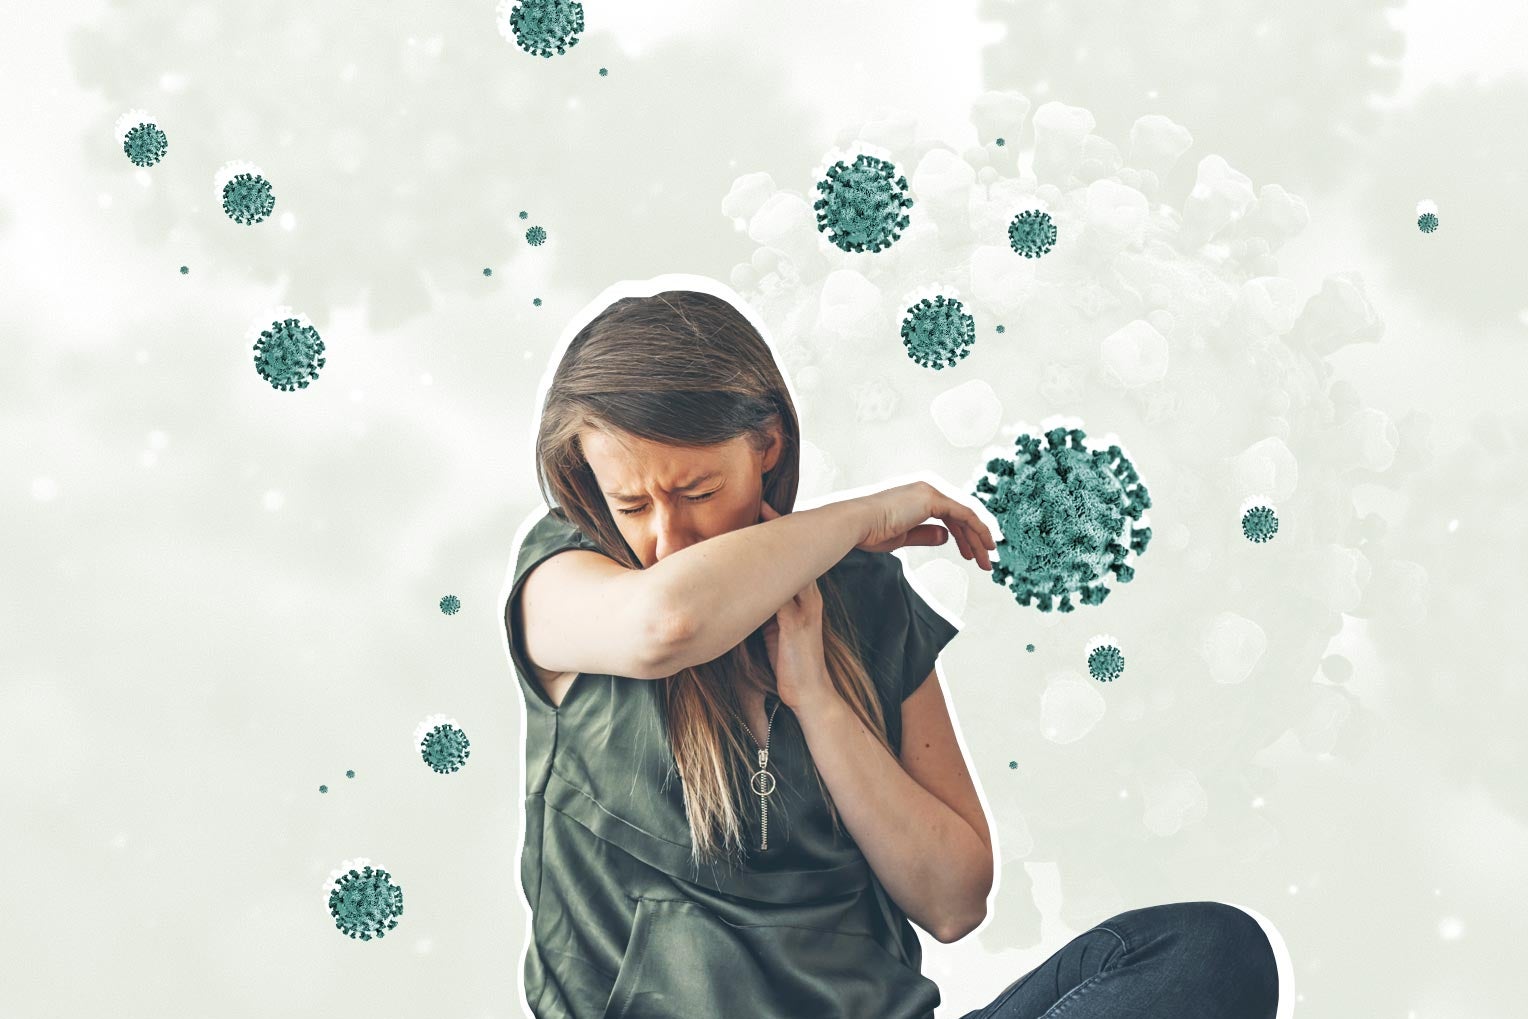 A woman coughs into her elbow with a visualization of the SARS-CoV-2 virus behind her.